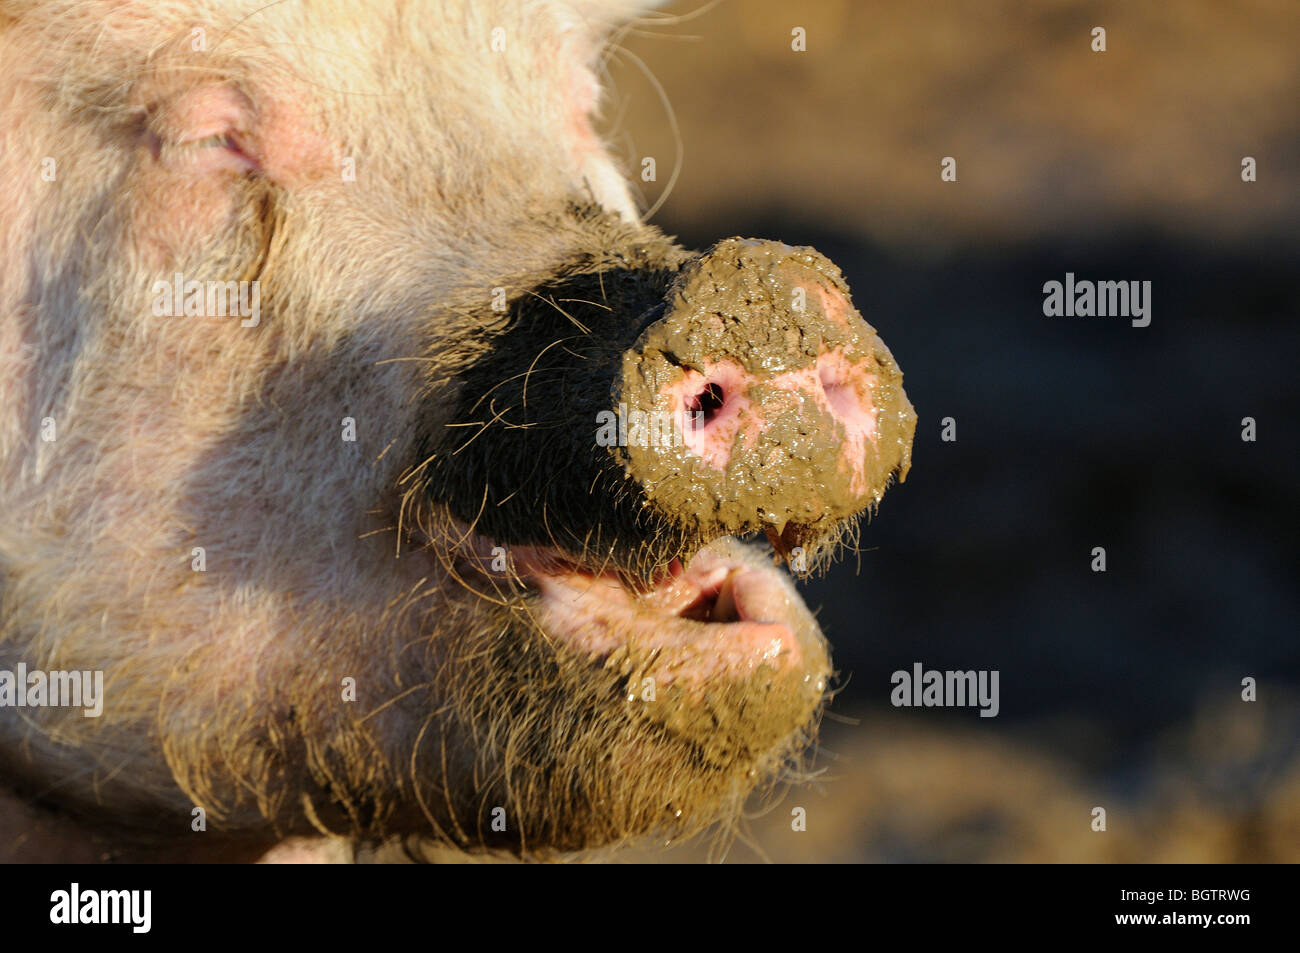 Domestic Pig (Sus scrofa domesticus) snout covered in mud, Oxfordshire, UK. Stock Photo